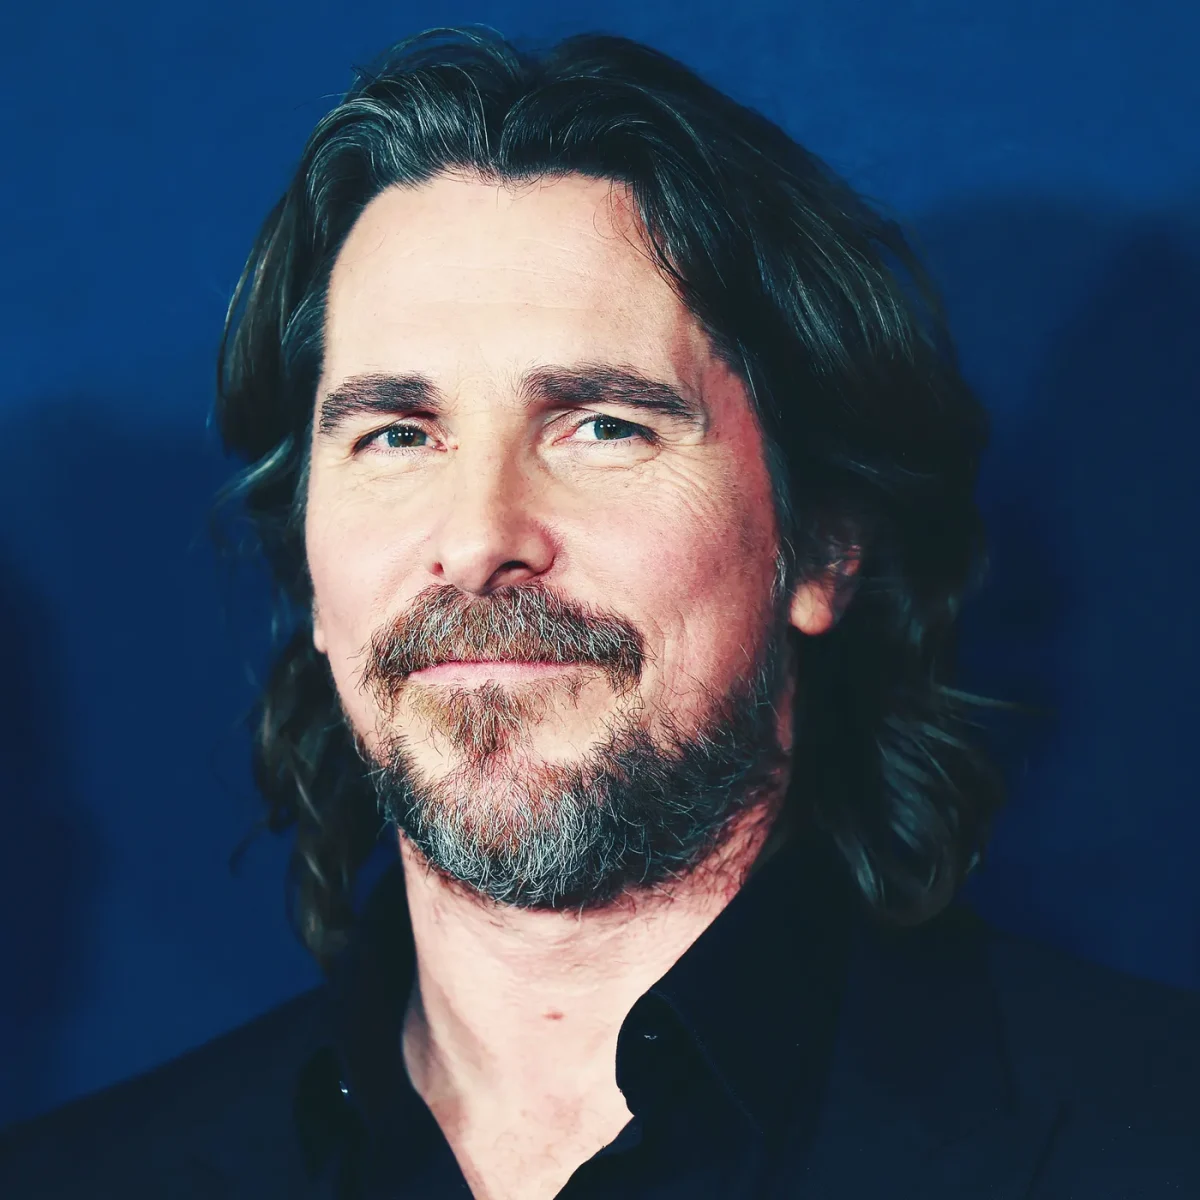 Ladies Go Gaga Over Christian Bale'S Shirtless Pics From His 50Th Birthday In Mexico